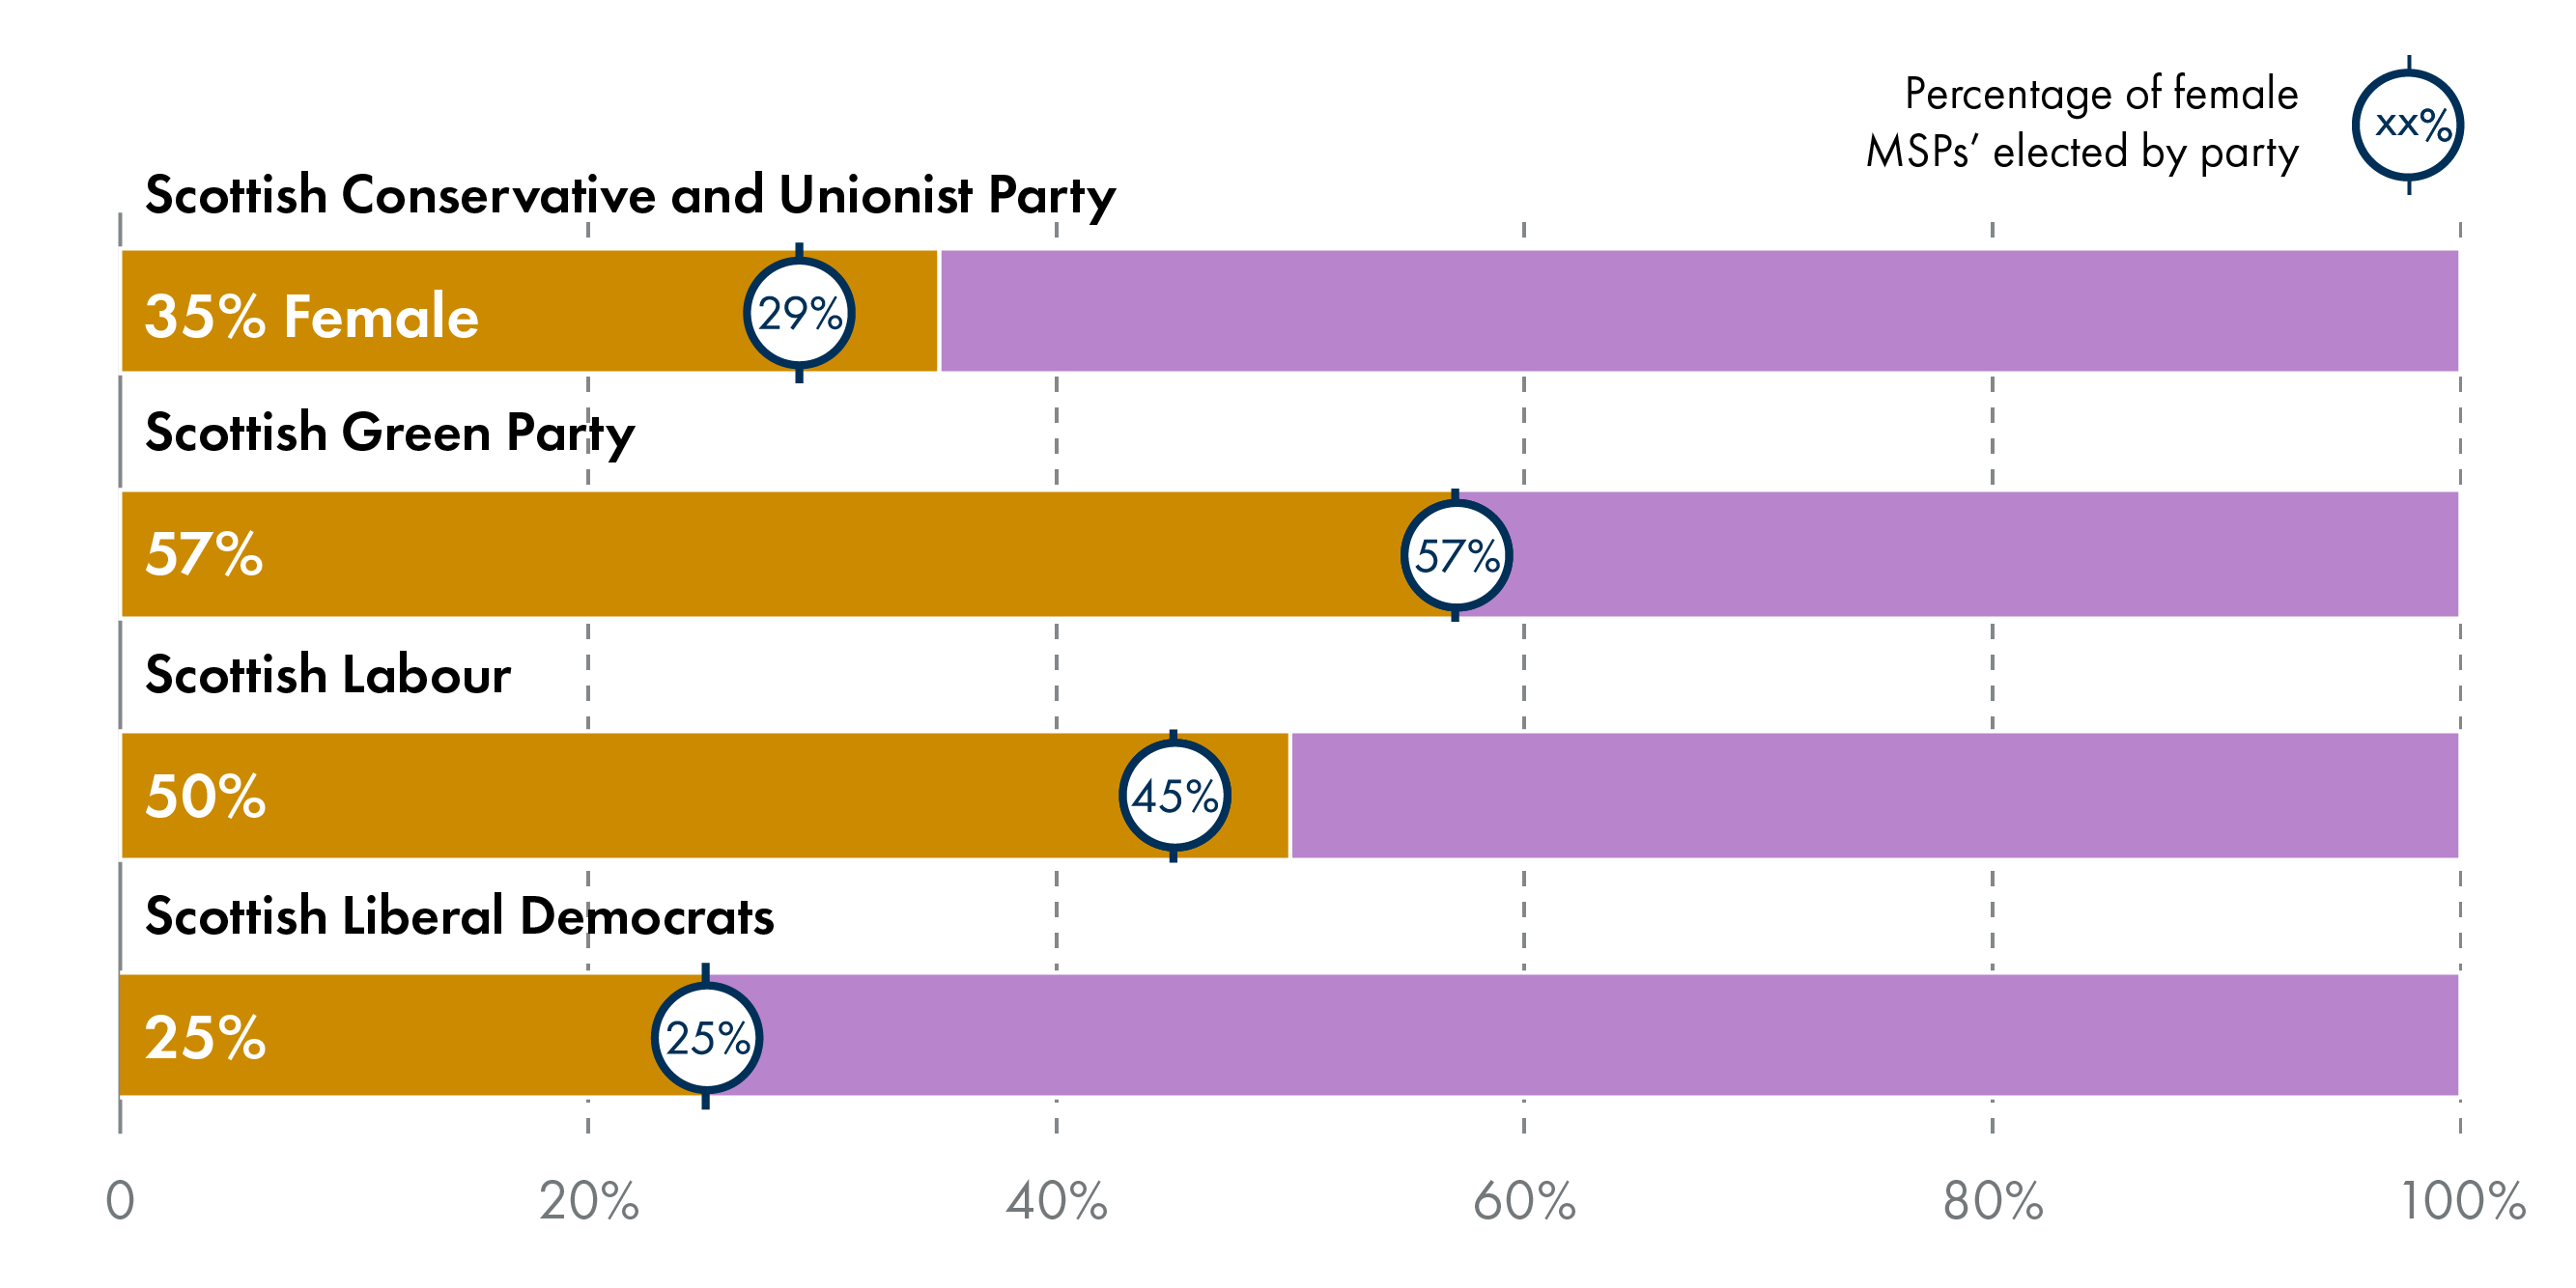 Scottish Conservative and Unionist Party - 35% of spokespeople are female, Scottish Green Party - 57% of spokespeople are female, Scottish Labour - 50% of spokespeople are female, Scottish Liberal Democrats - 25% of spokespeople are female